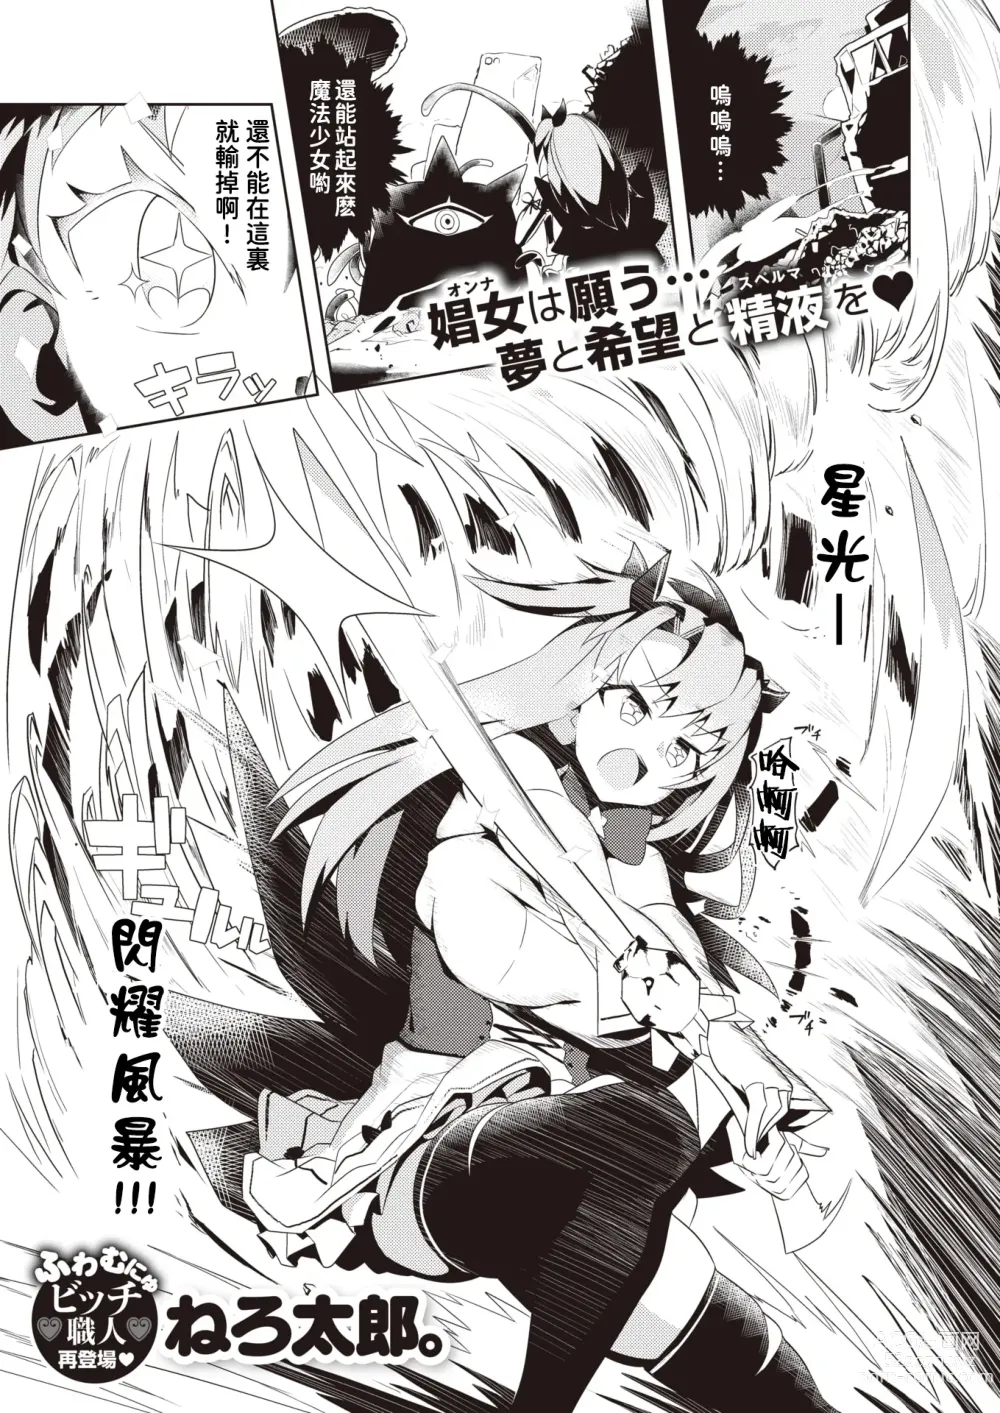 Page 1 of manga Magical Witch (decensored)